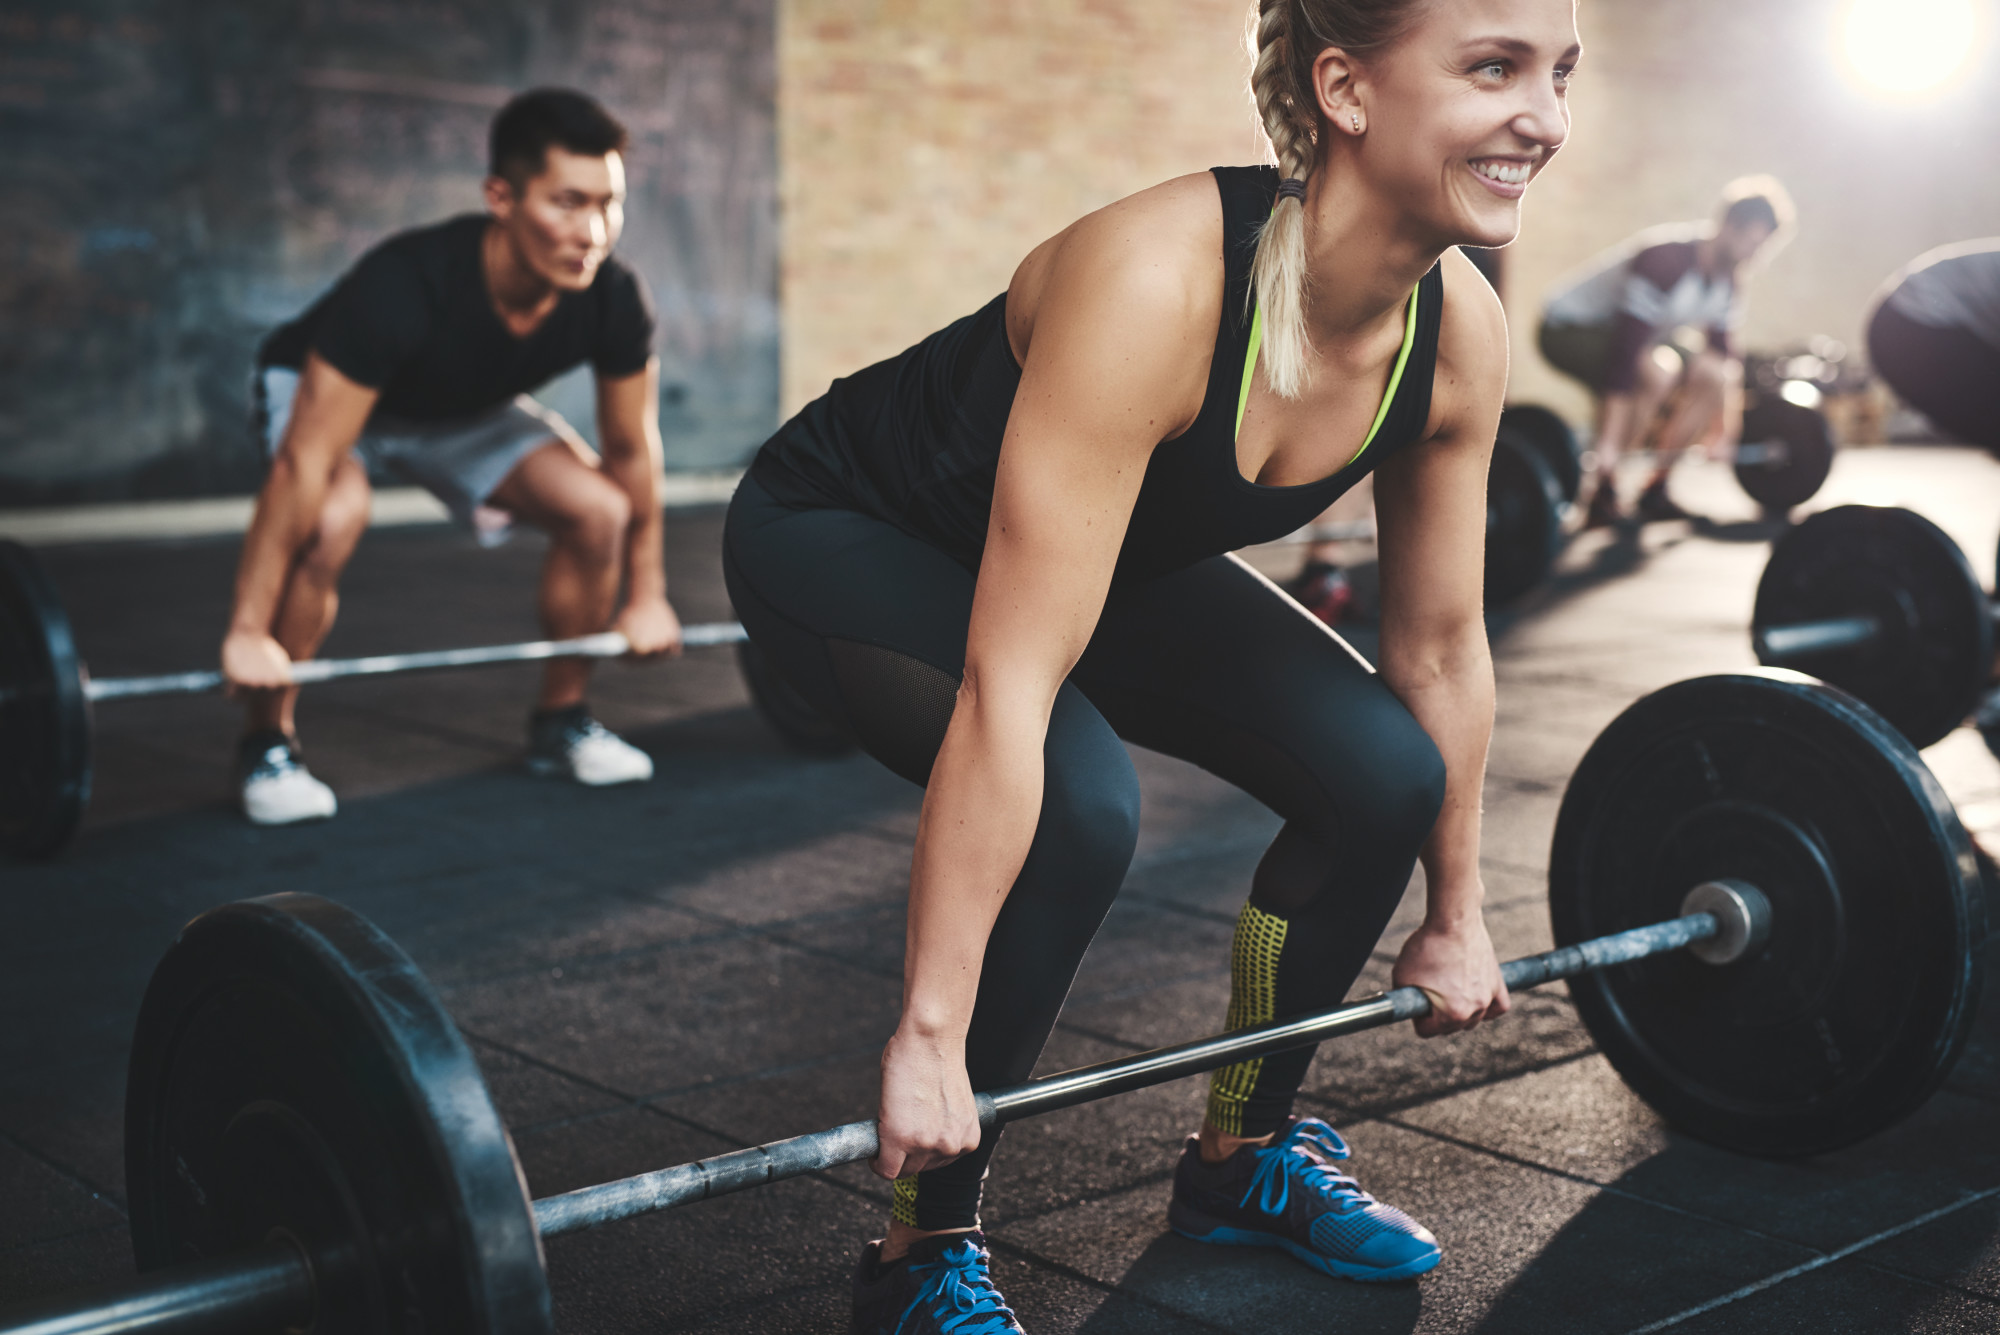 Exercise Safety 101: 5 Workout Mistakes You Should Know and Avoid